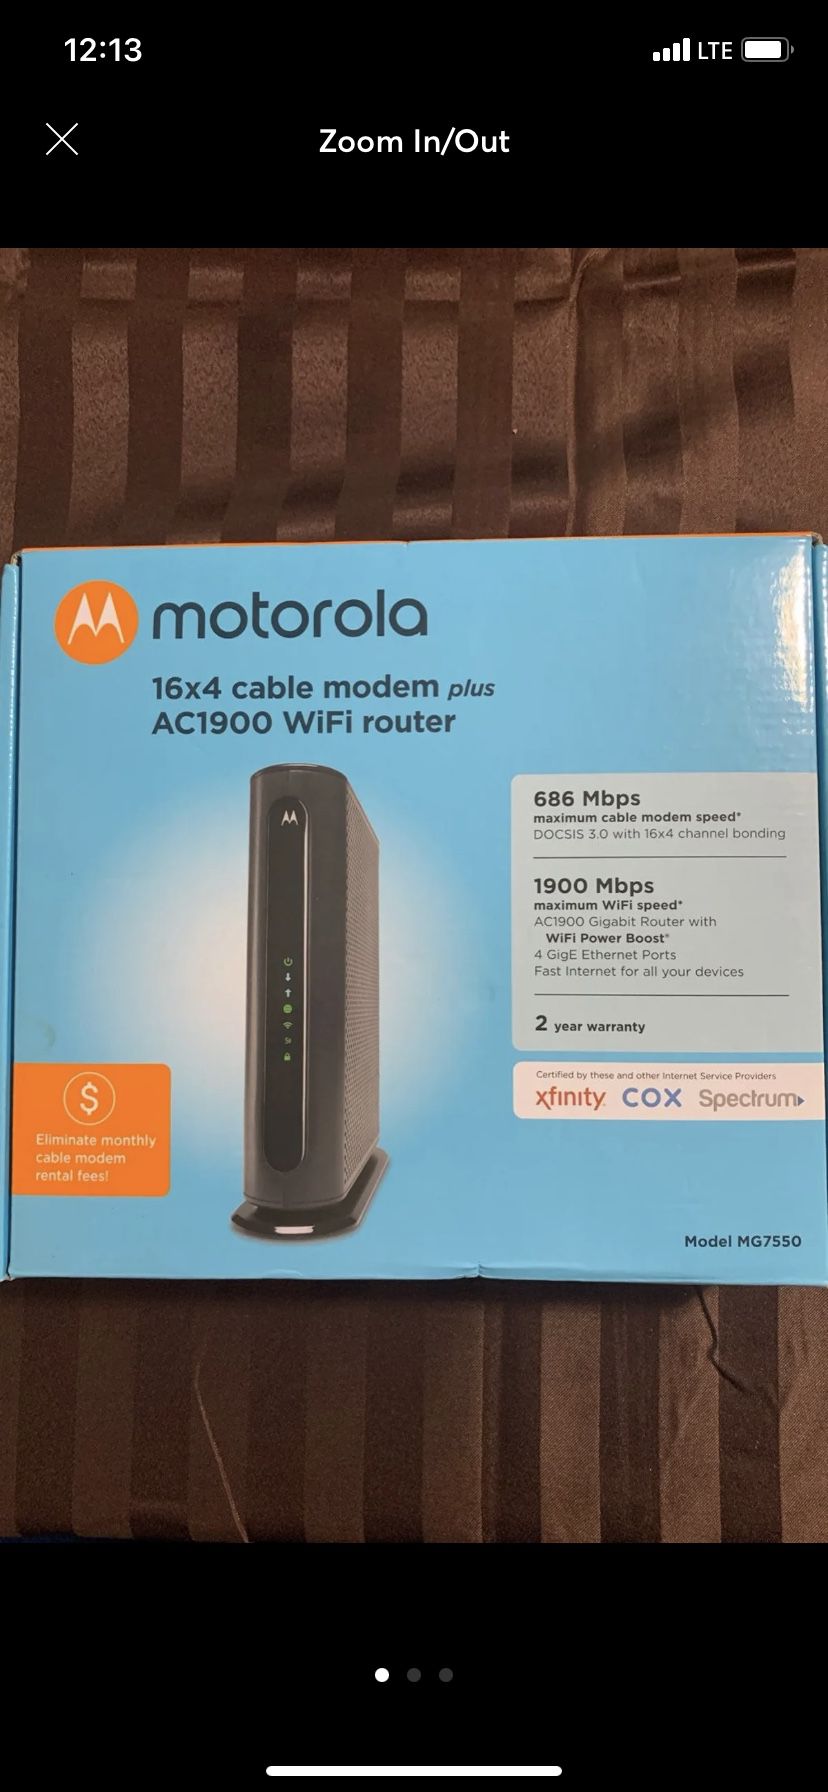 Motorola modem and router